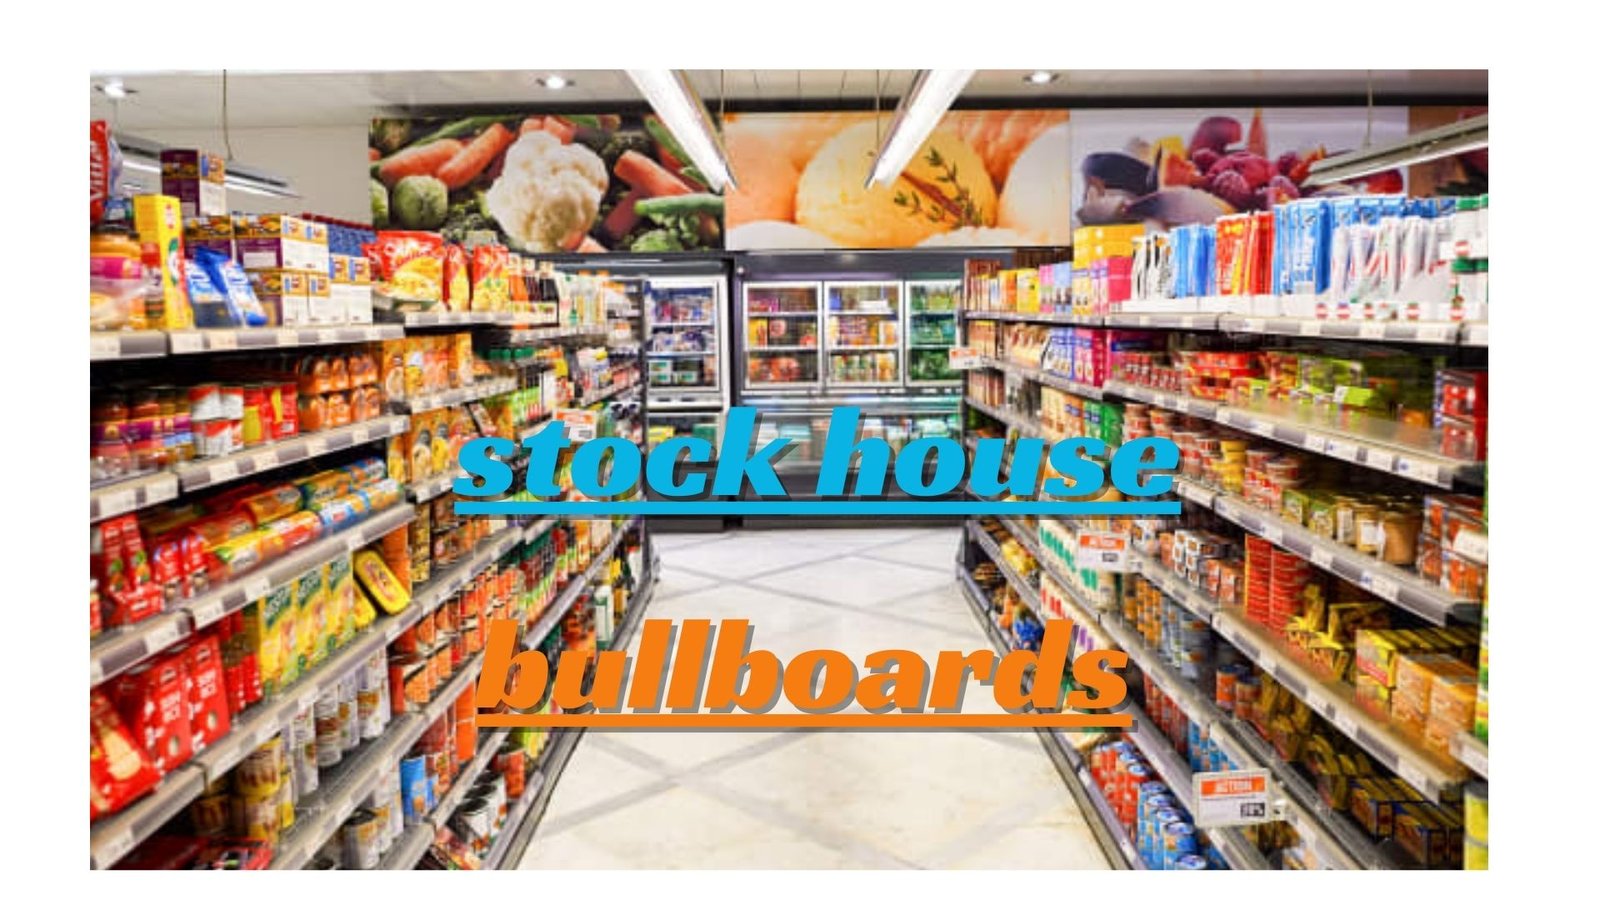 Stock House Bullboards